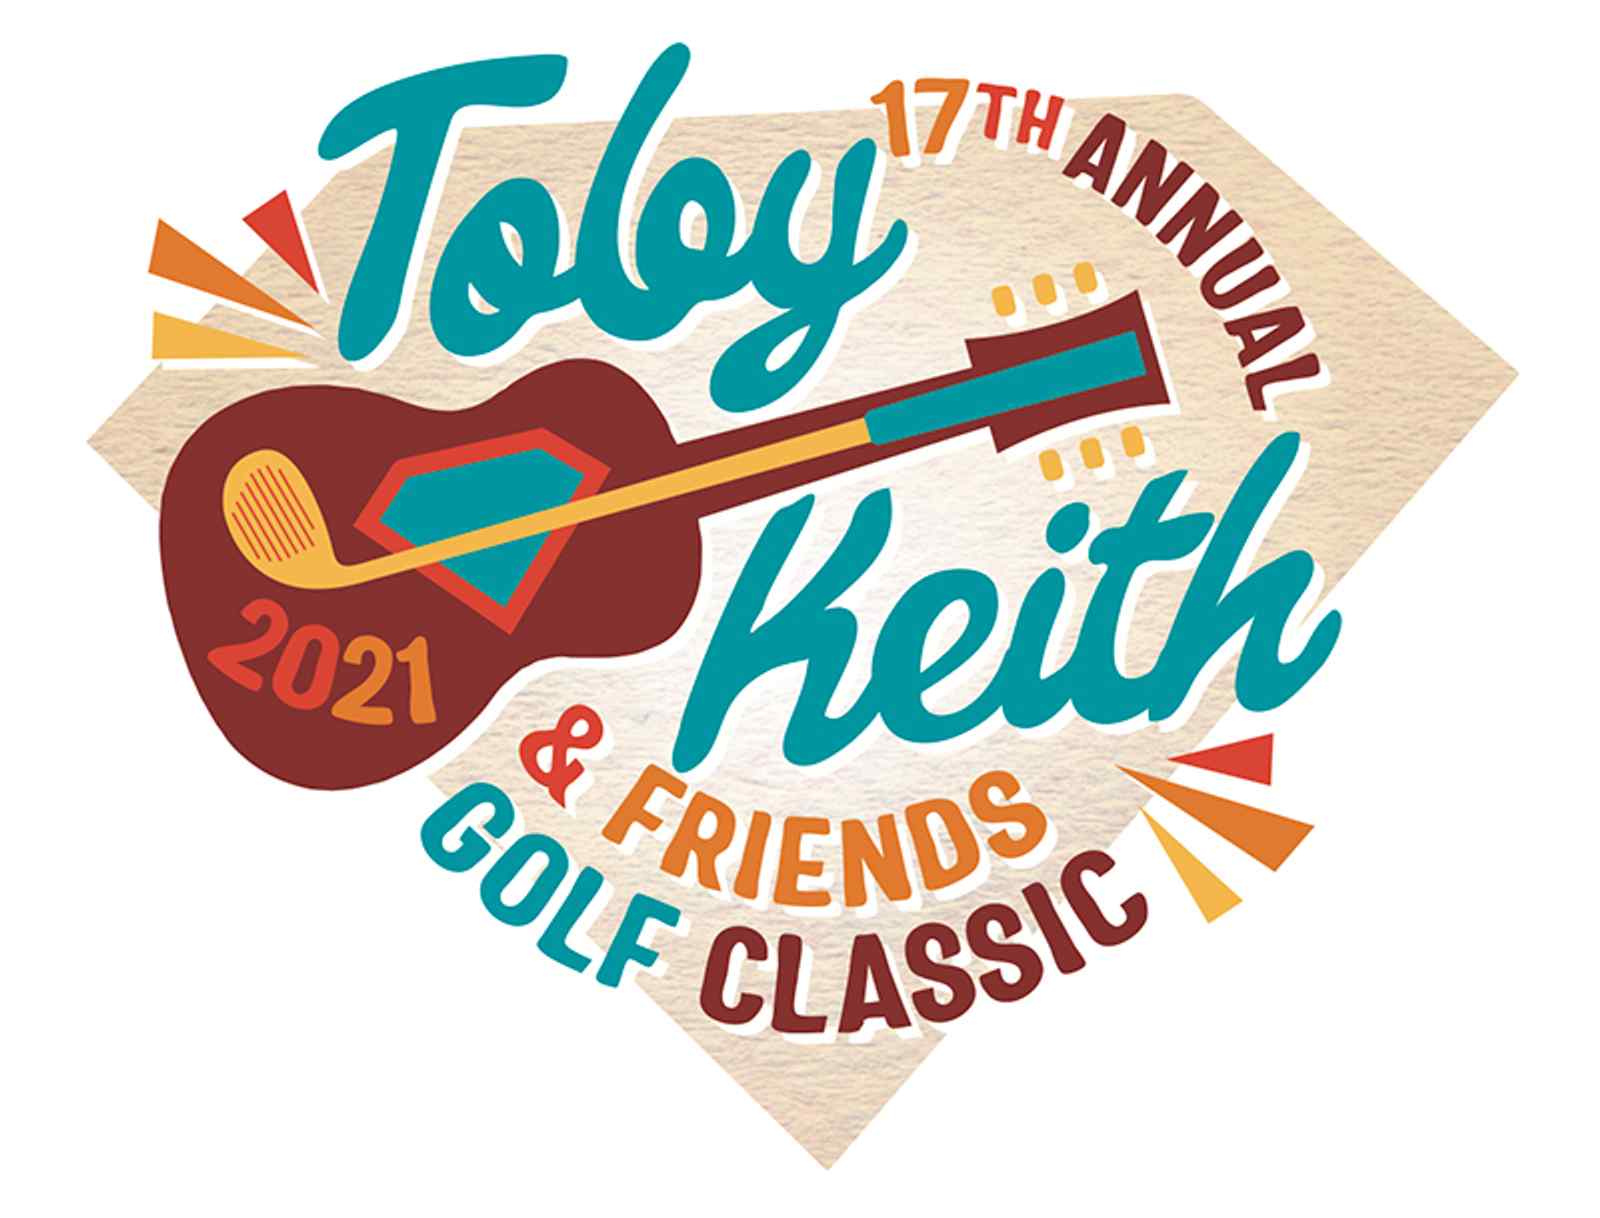 Toby Keith & Friends Golf Classic Returns This Month